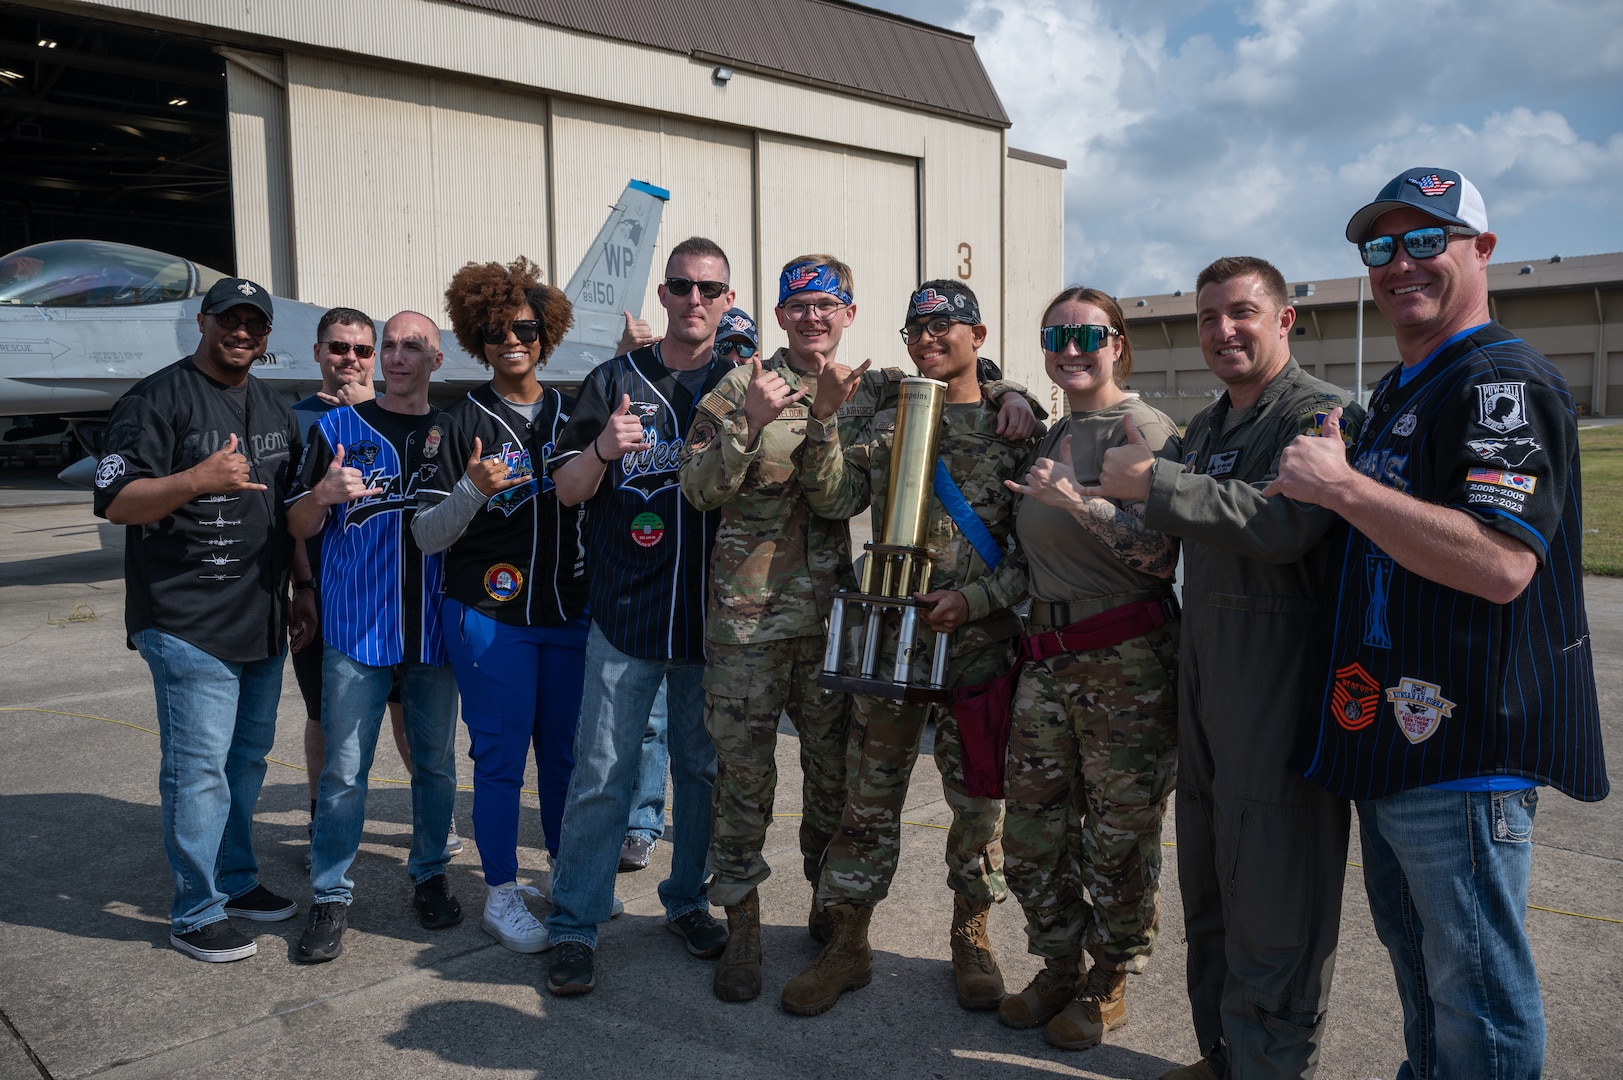 Winners of the annual bilateral munitions load crew competition, 35th Fighter Generation Squadron load crew members, and leaders from the 8th Fighter Wing pose with the Pen Fest trophy at Kunsan Air Base